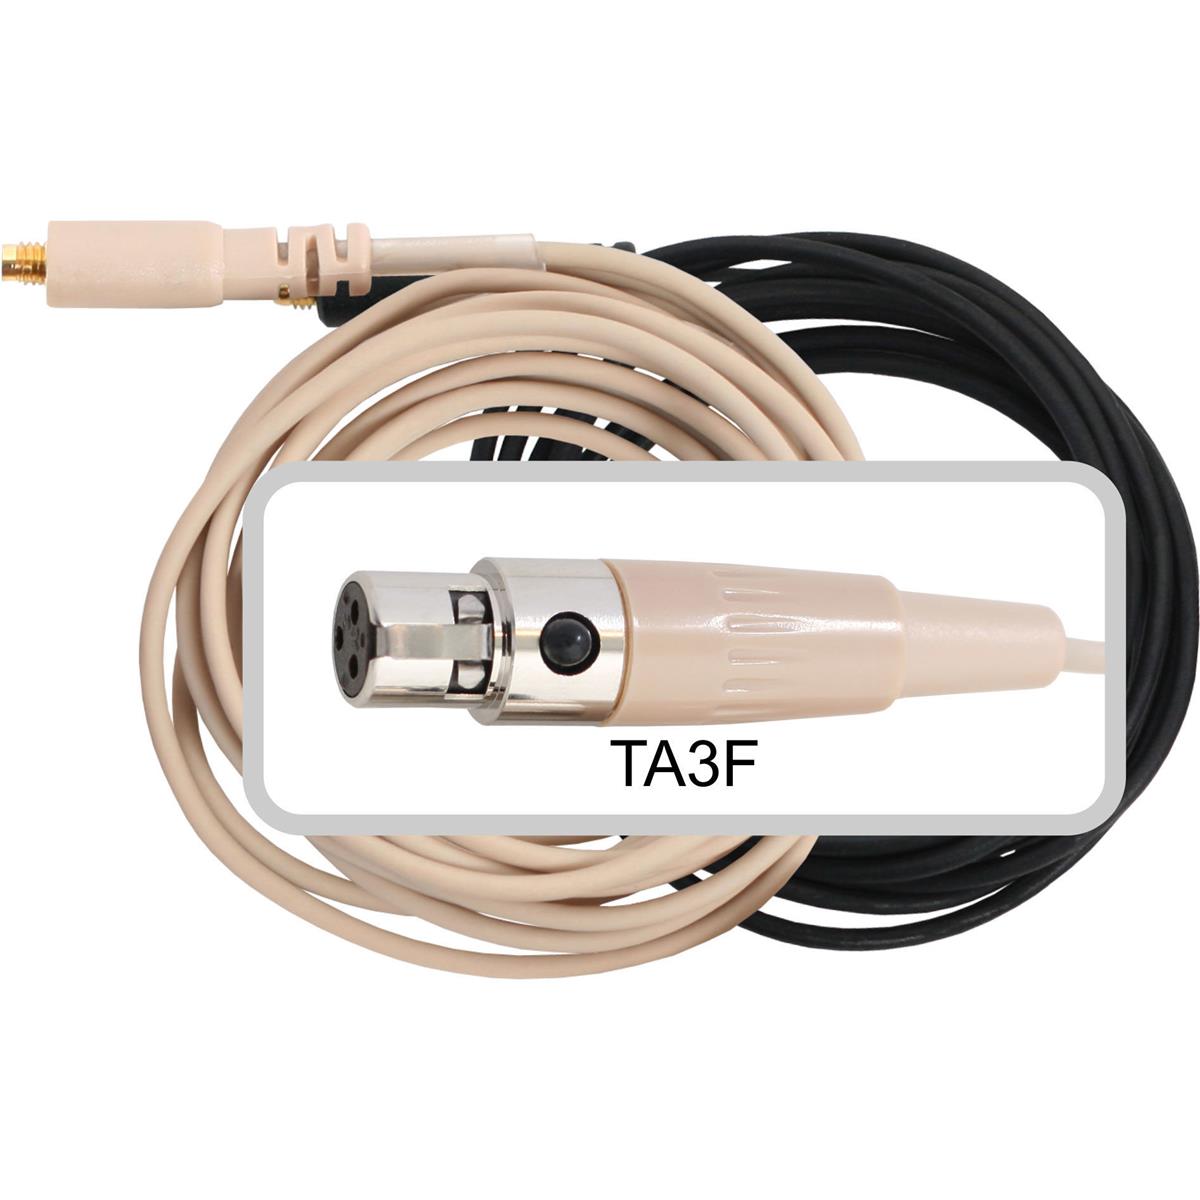 Image of Galaxy Audio CBL3GAL HS3/ES3 Headset Cable with TA3F Connector